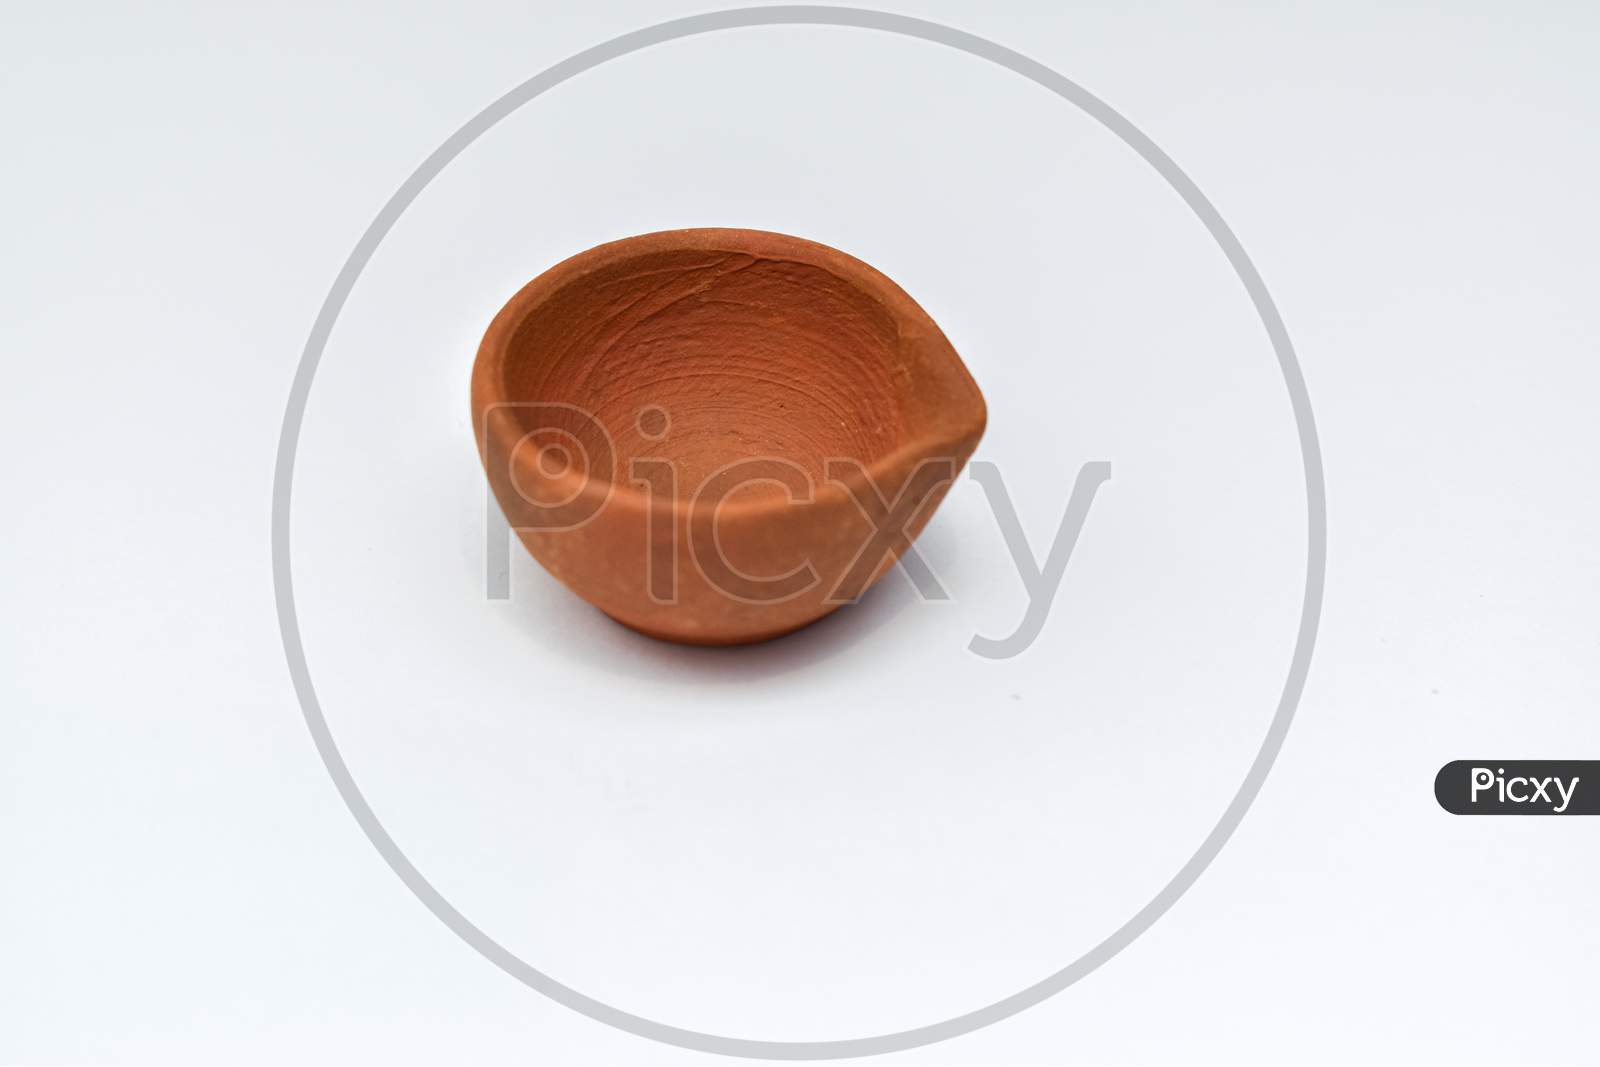 Indian Clay Oil Lamp Or Diya Used For Diwali And Festival Celebration With White Background